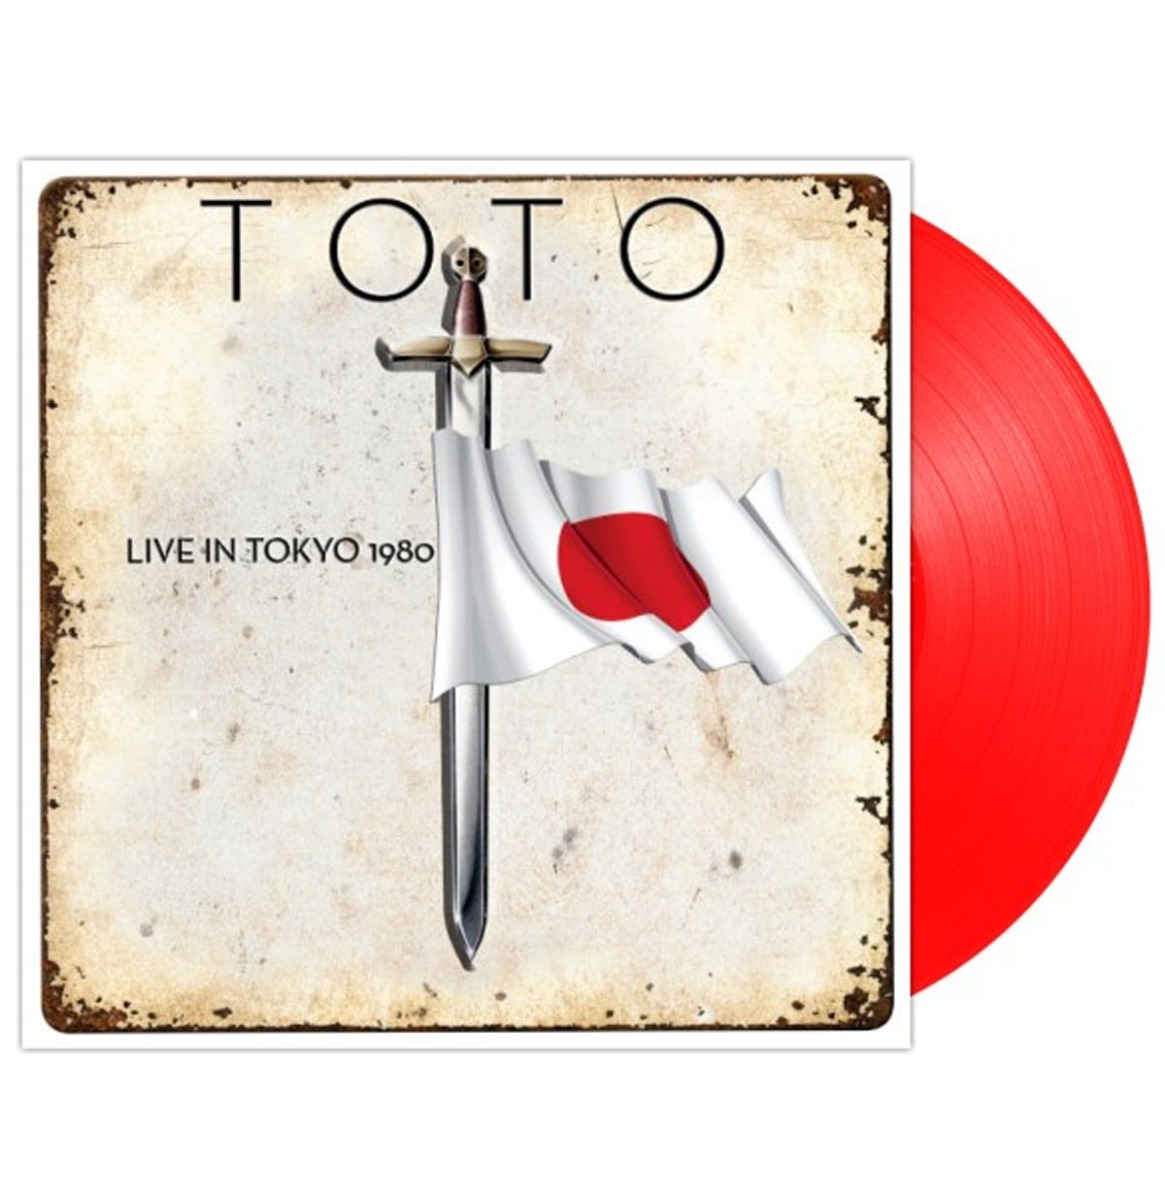 Toto - Live In Tokyo 1980 LP - RSD Red Vinyl